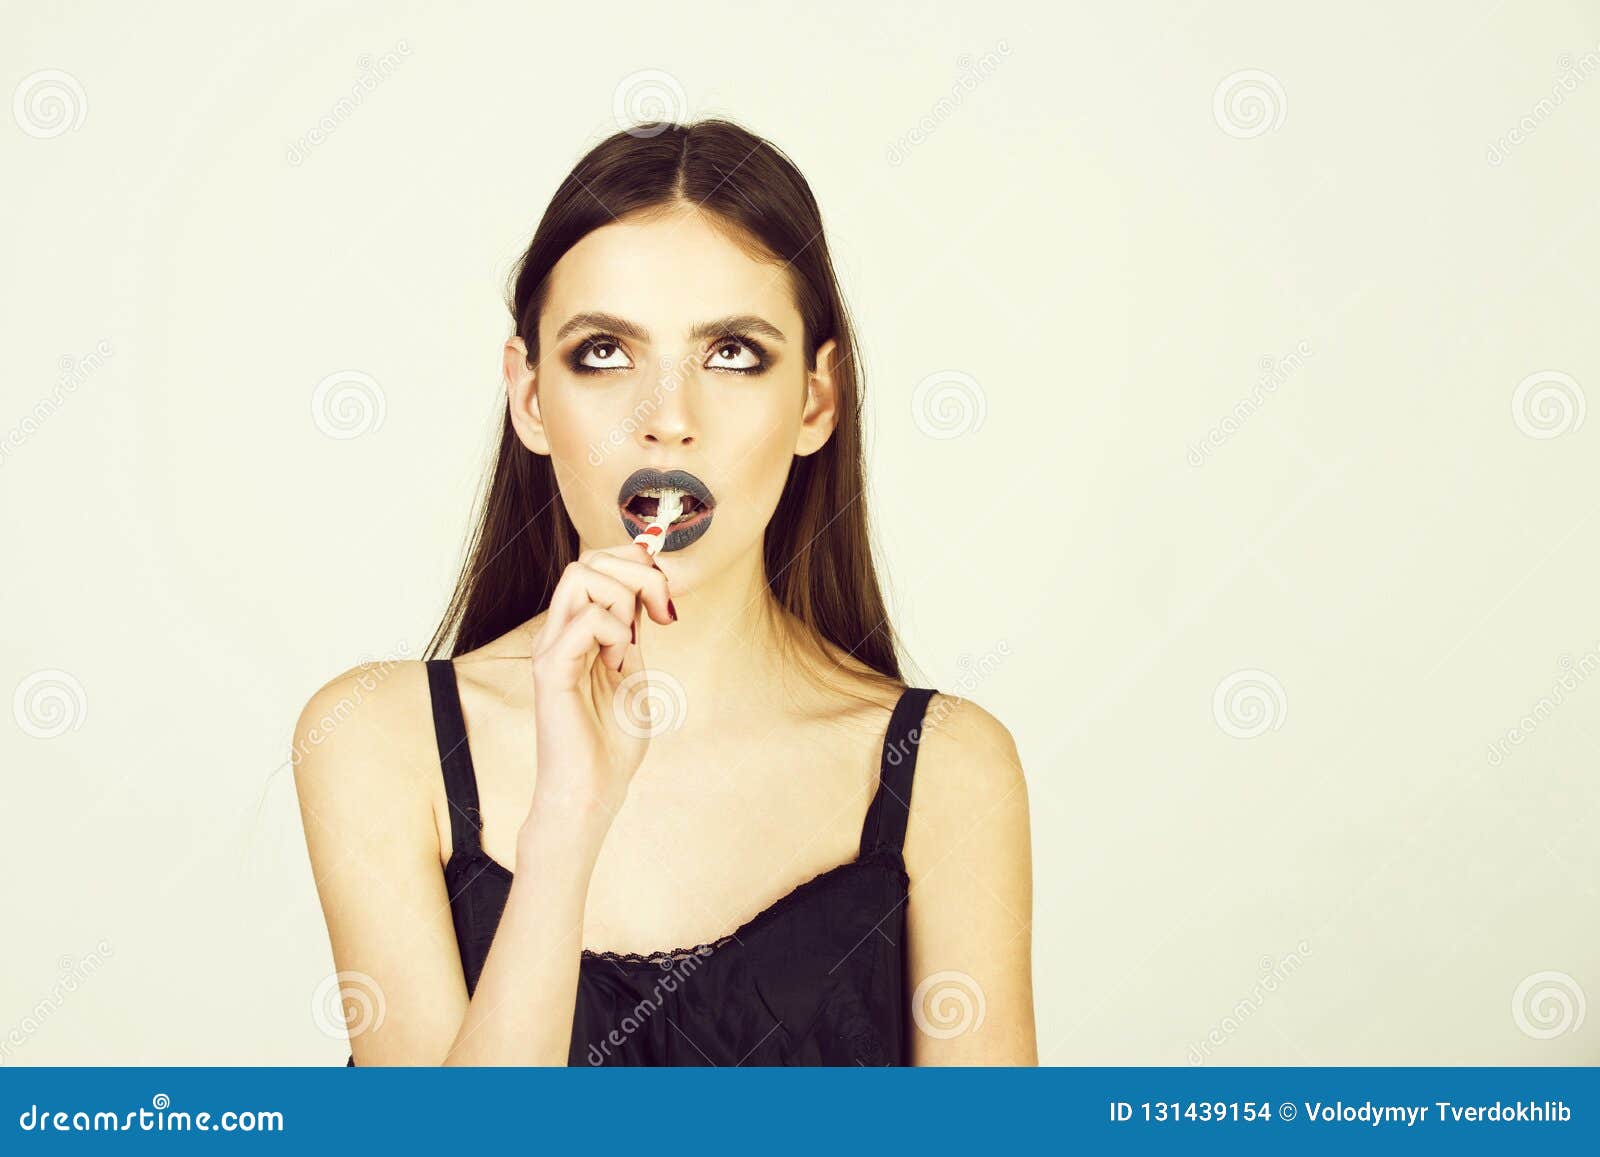 Girl With Teeth Braces And Brush Has Fashionable Makeup Stock Photo